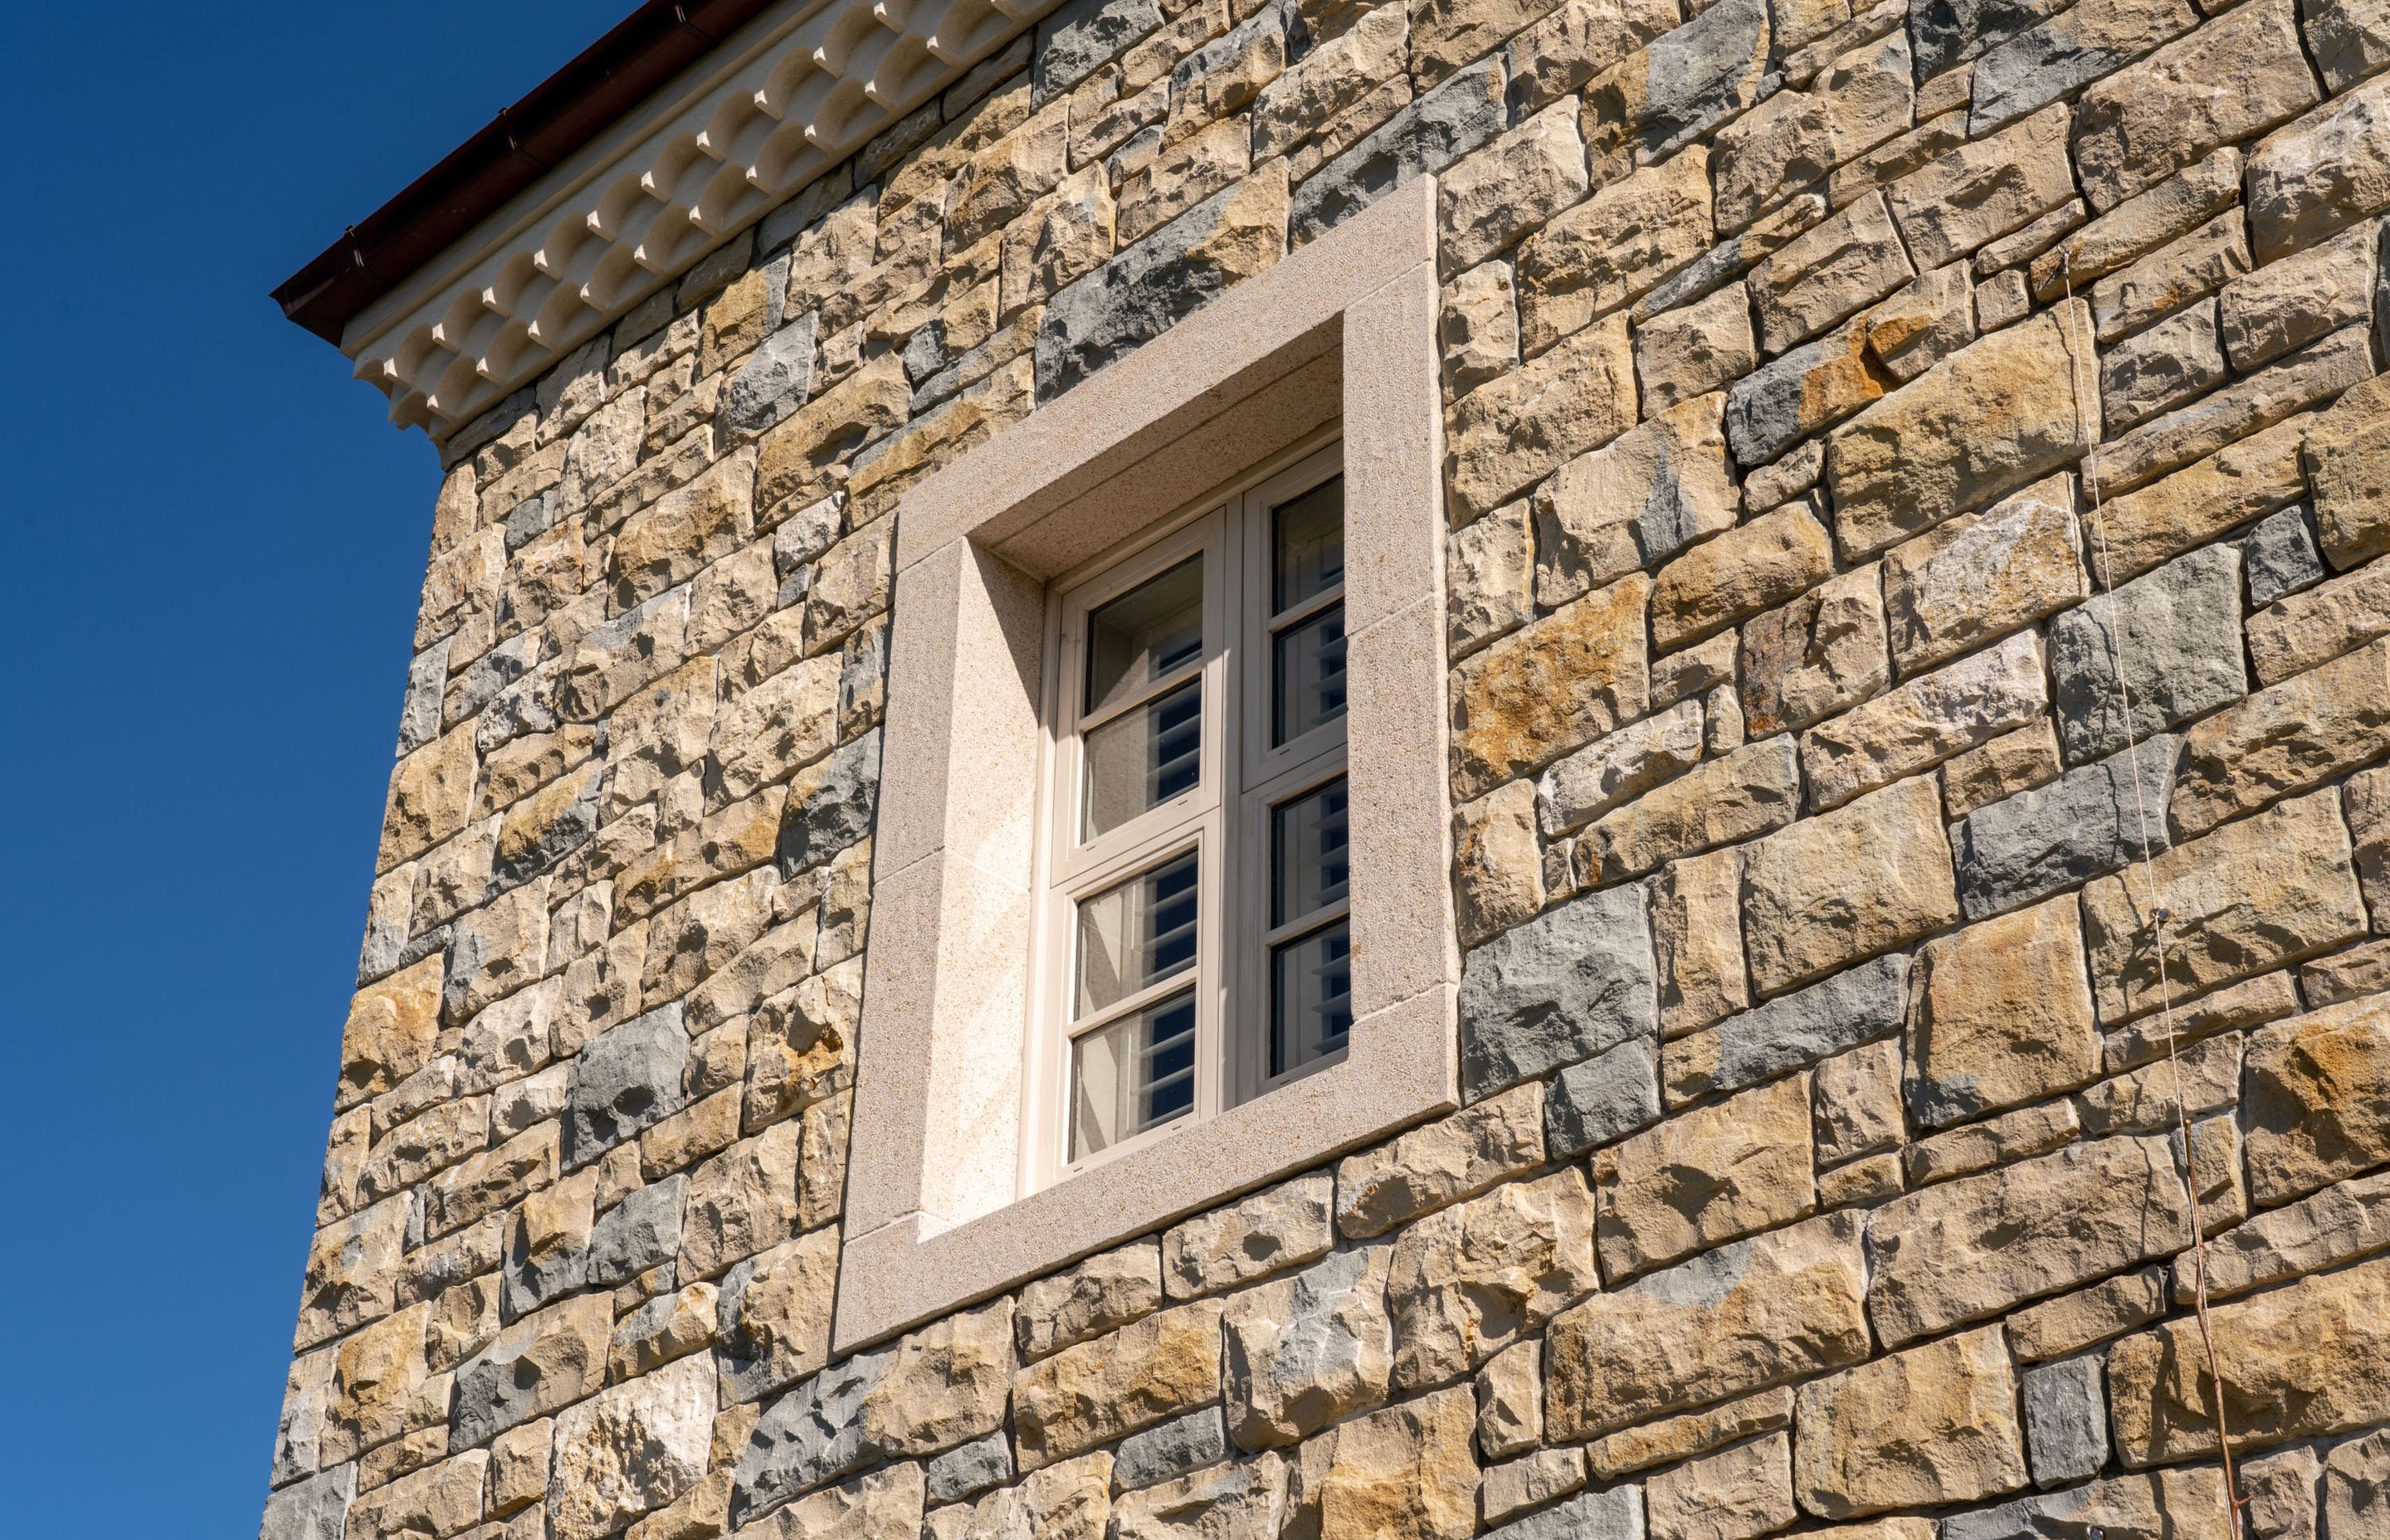 The stonework was purposefully laid to look imperfect and asymmetrical, to better suit the rustic, rural feel.